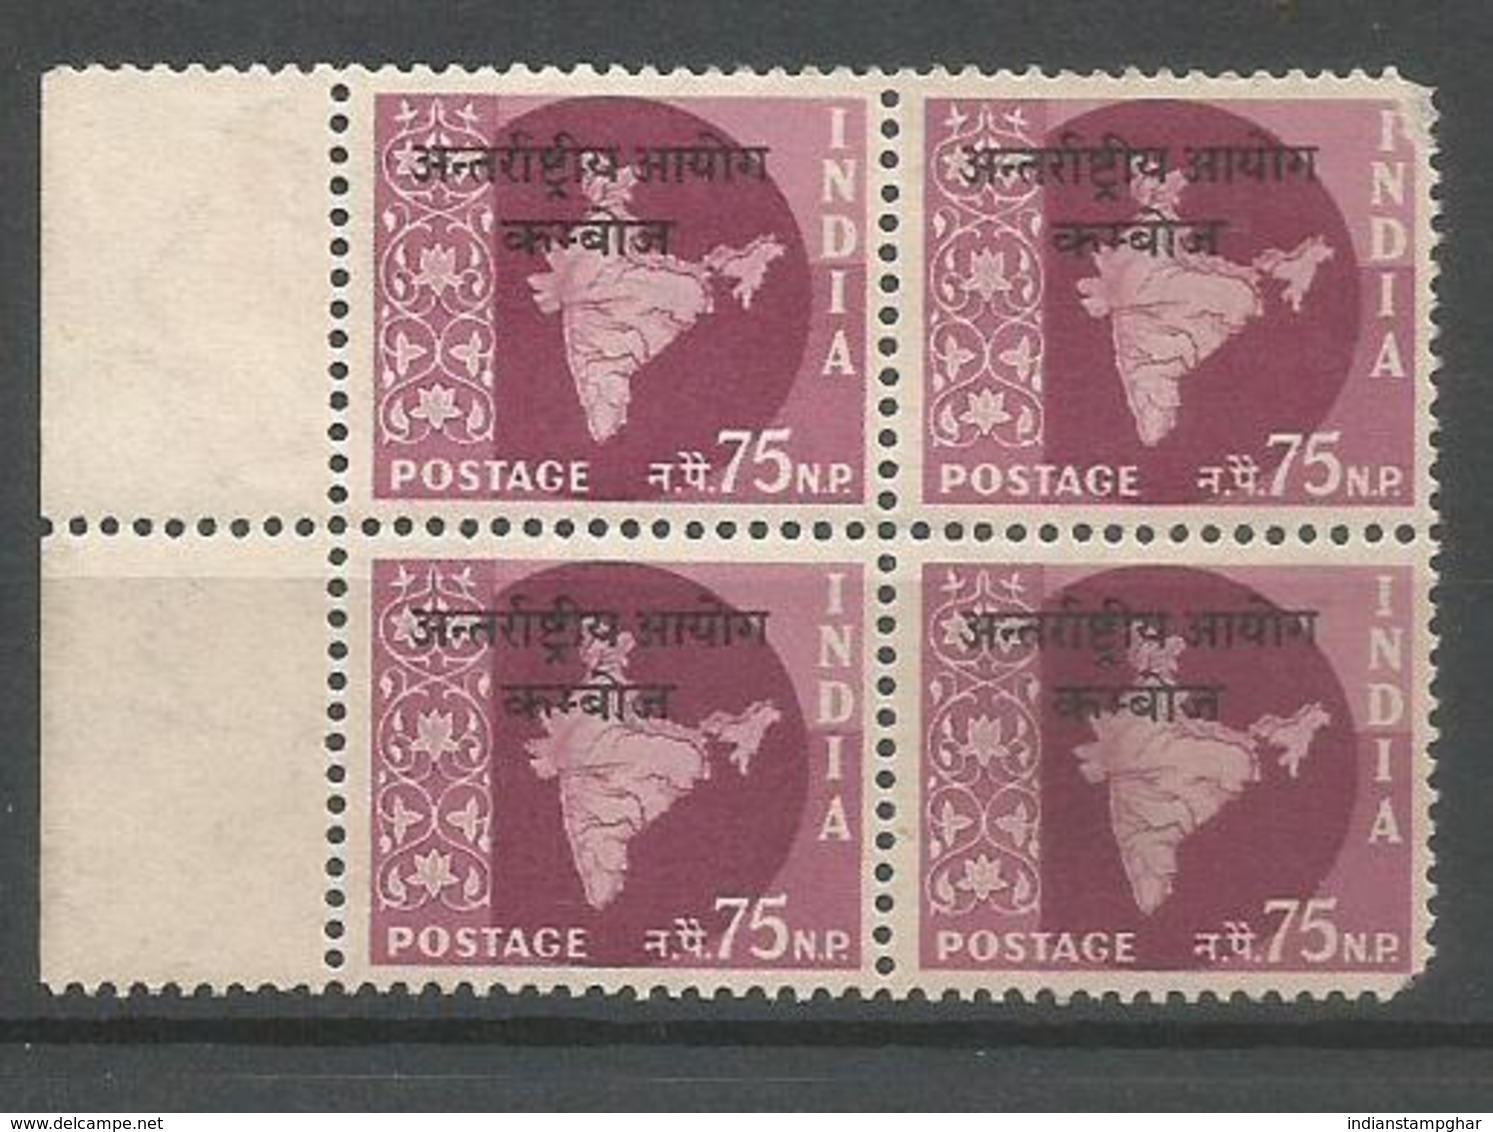 Cambodia Opvt. On 75np Map, Block Of 4,MNH 1962 Star Wmk, Military Stamps, As Per Scan - Militärpostmarken